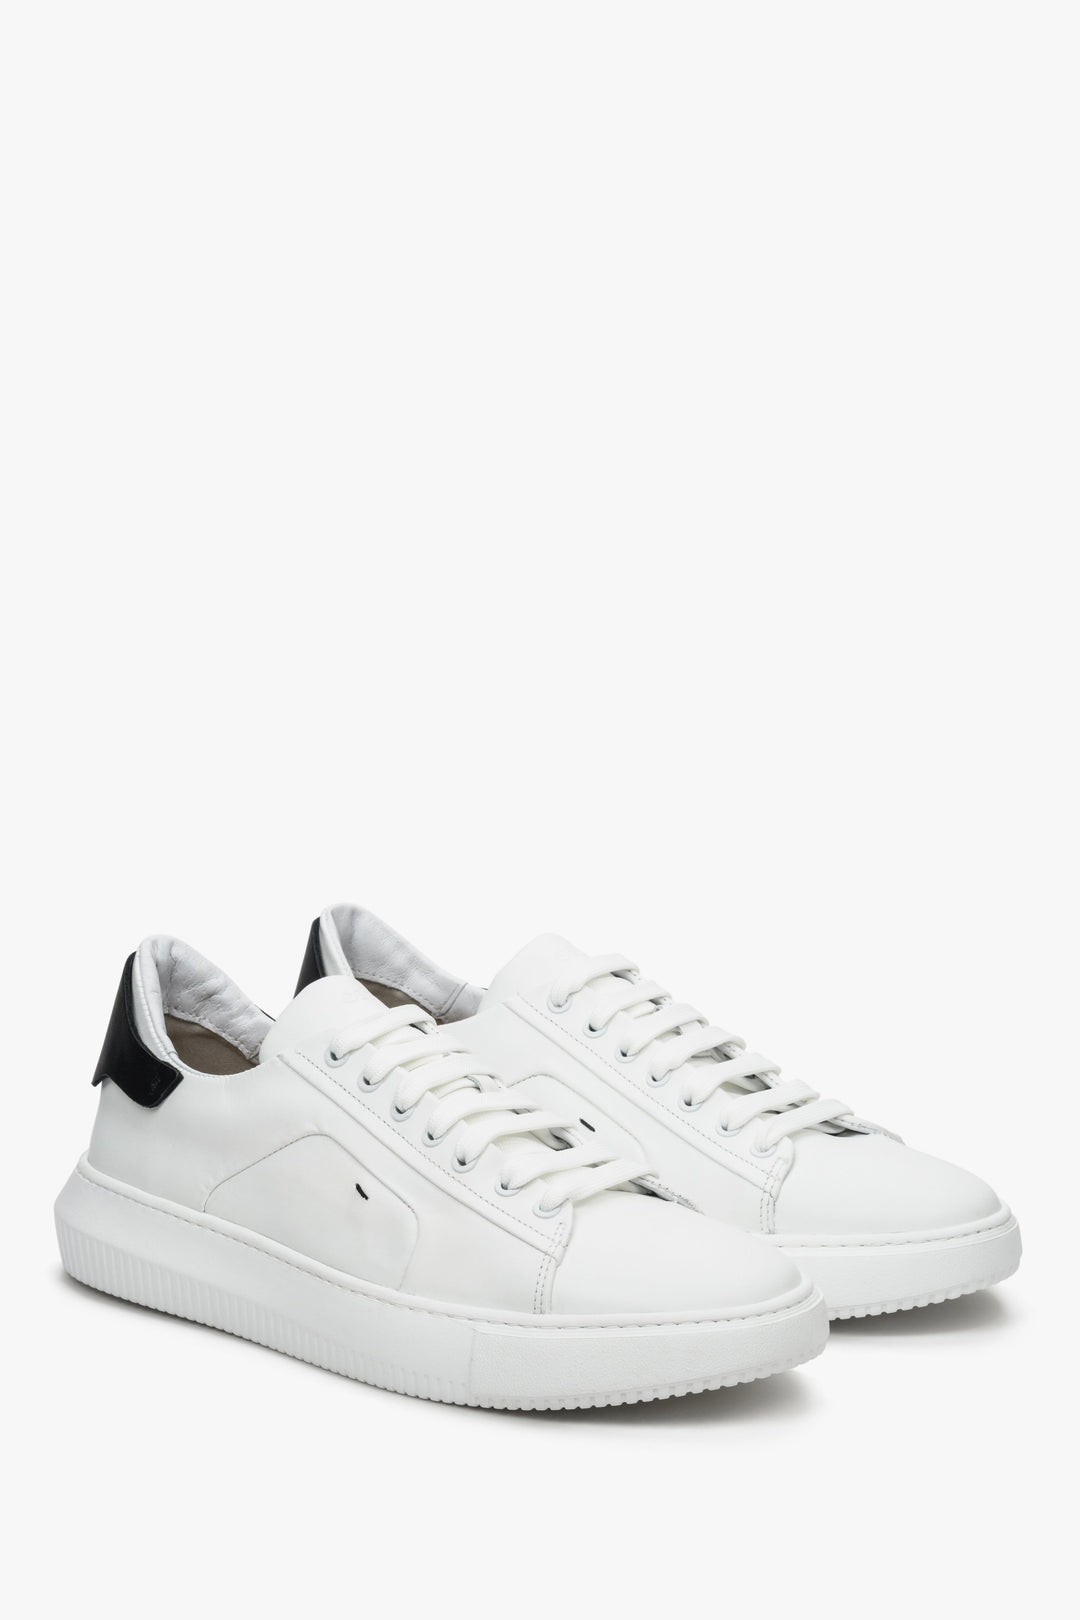 Estro men's white sneakers made of natural leather with laces - presentation of the toe and shoe side.